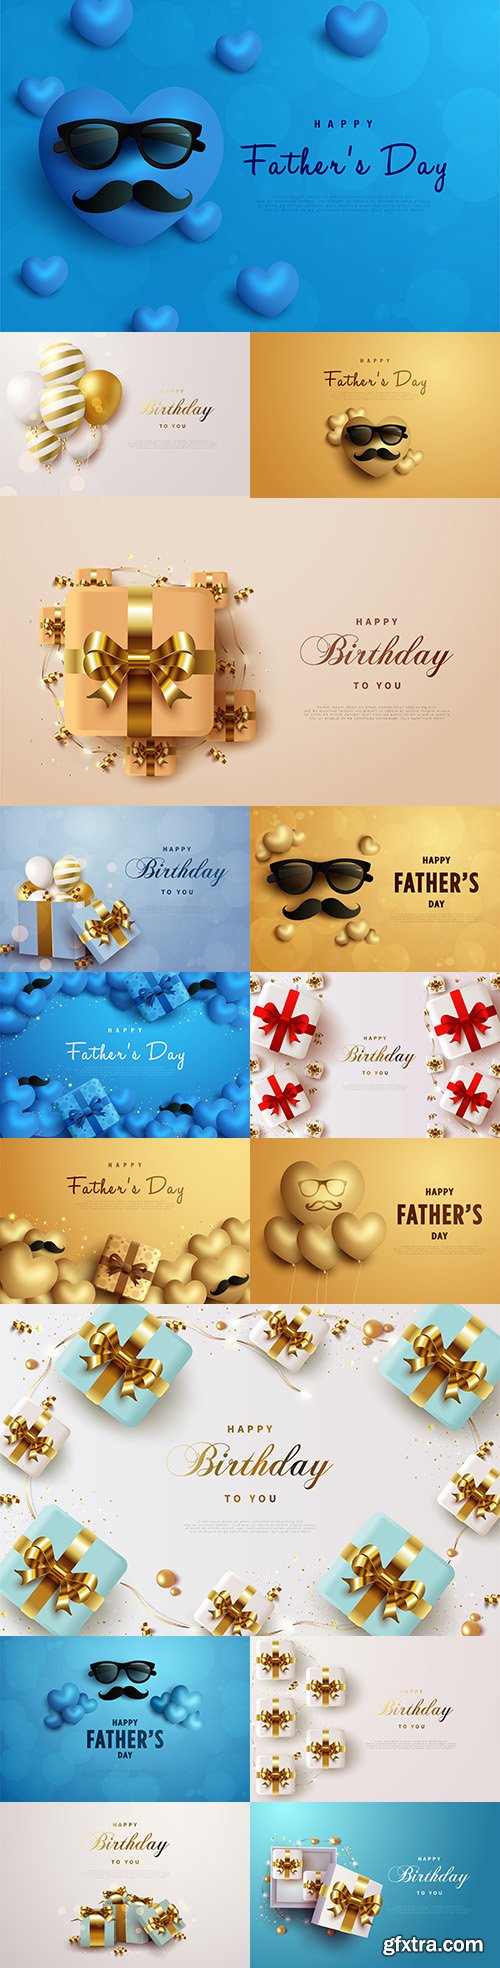 Birthday and father\'s day holiday illustrations with gifts